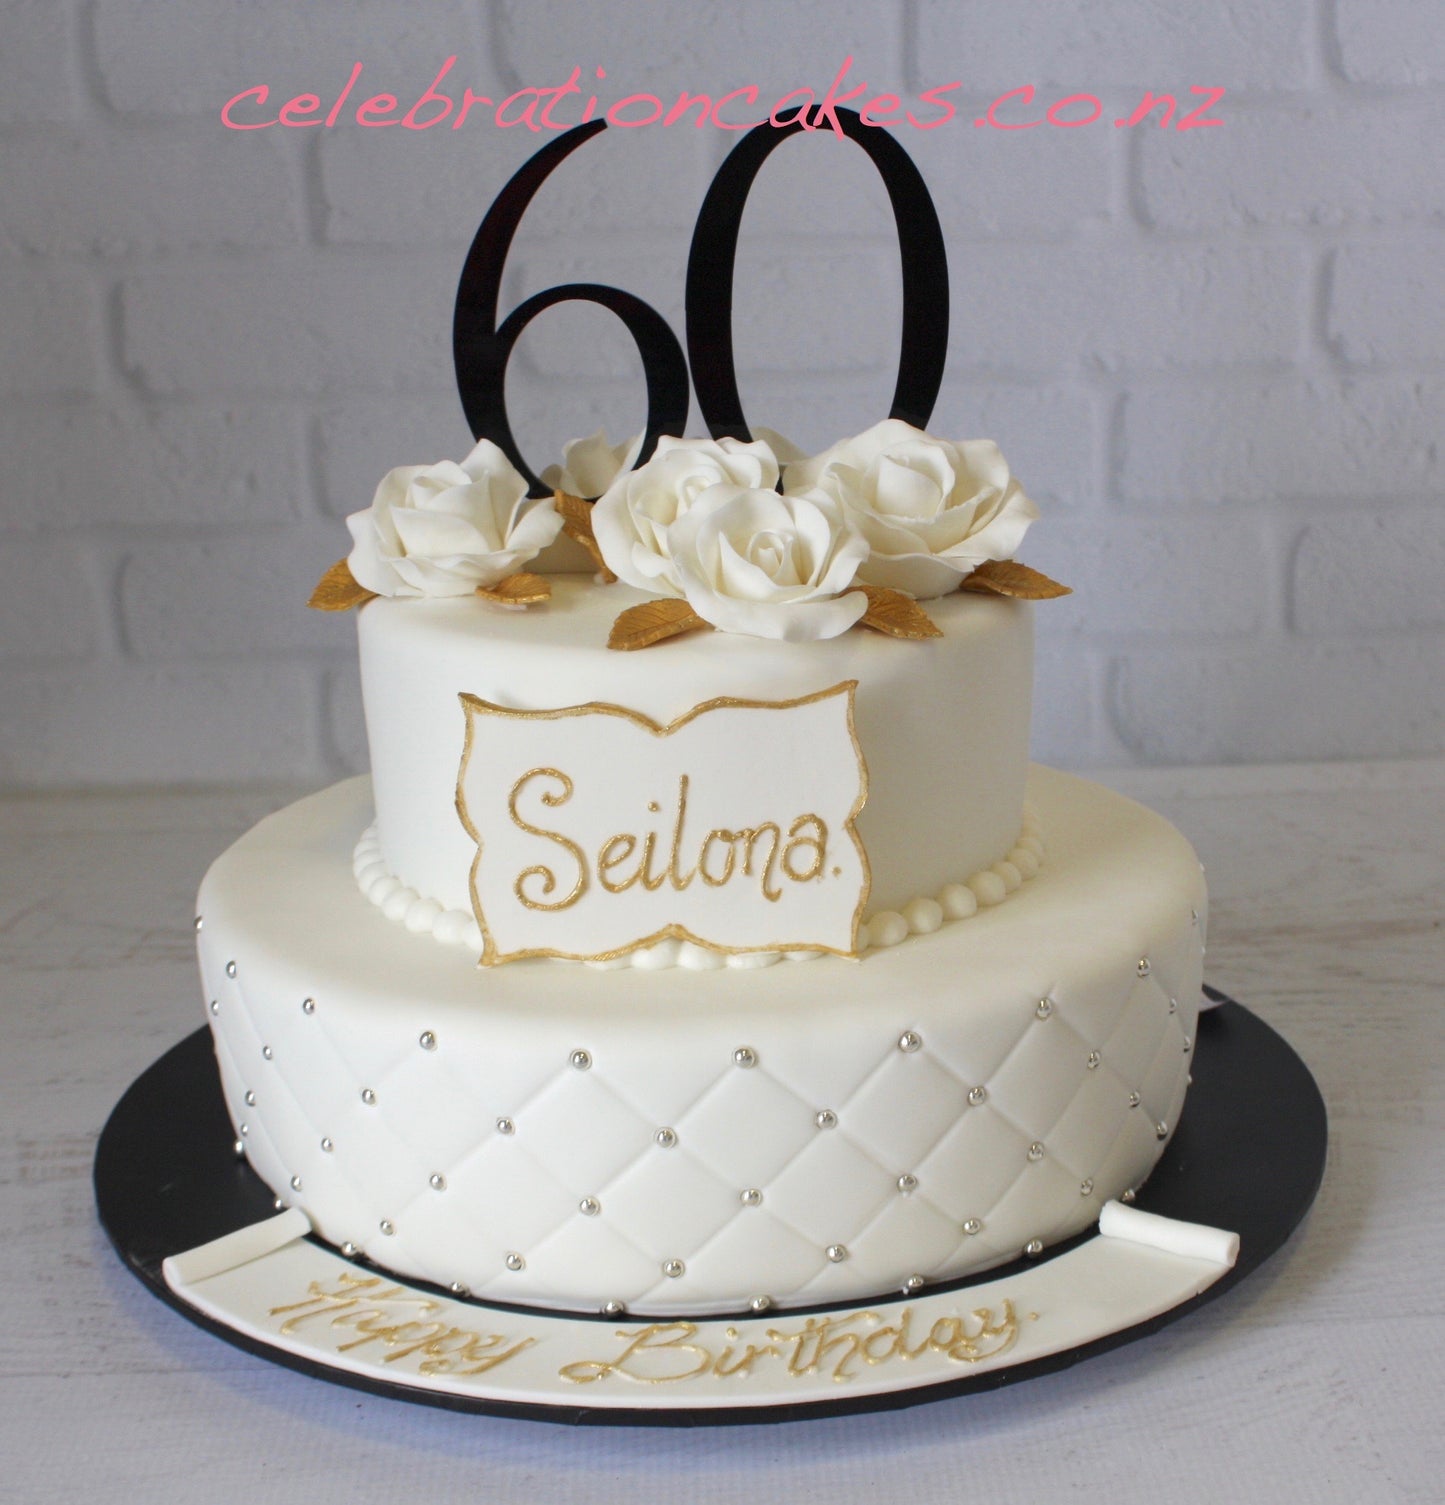 Cakes by geeya - White and gold Themed 60th Birthday Cake.. | Facebook